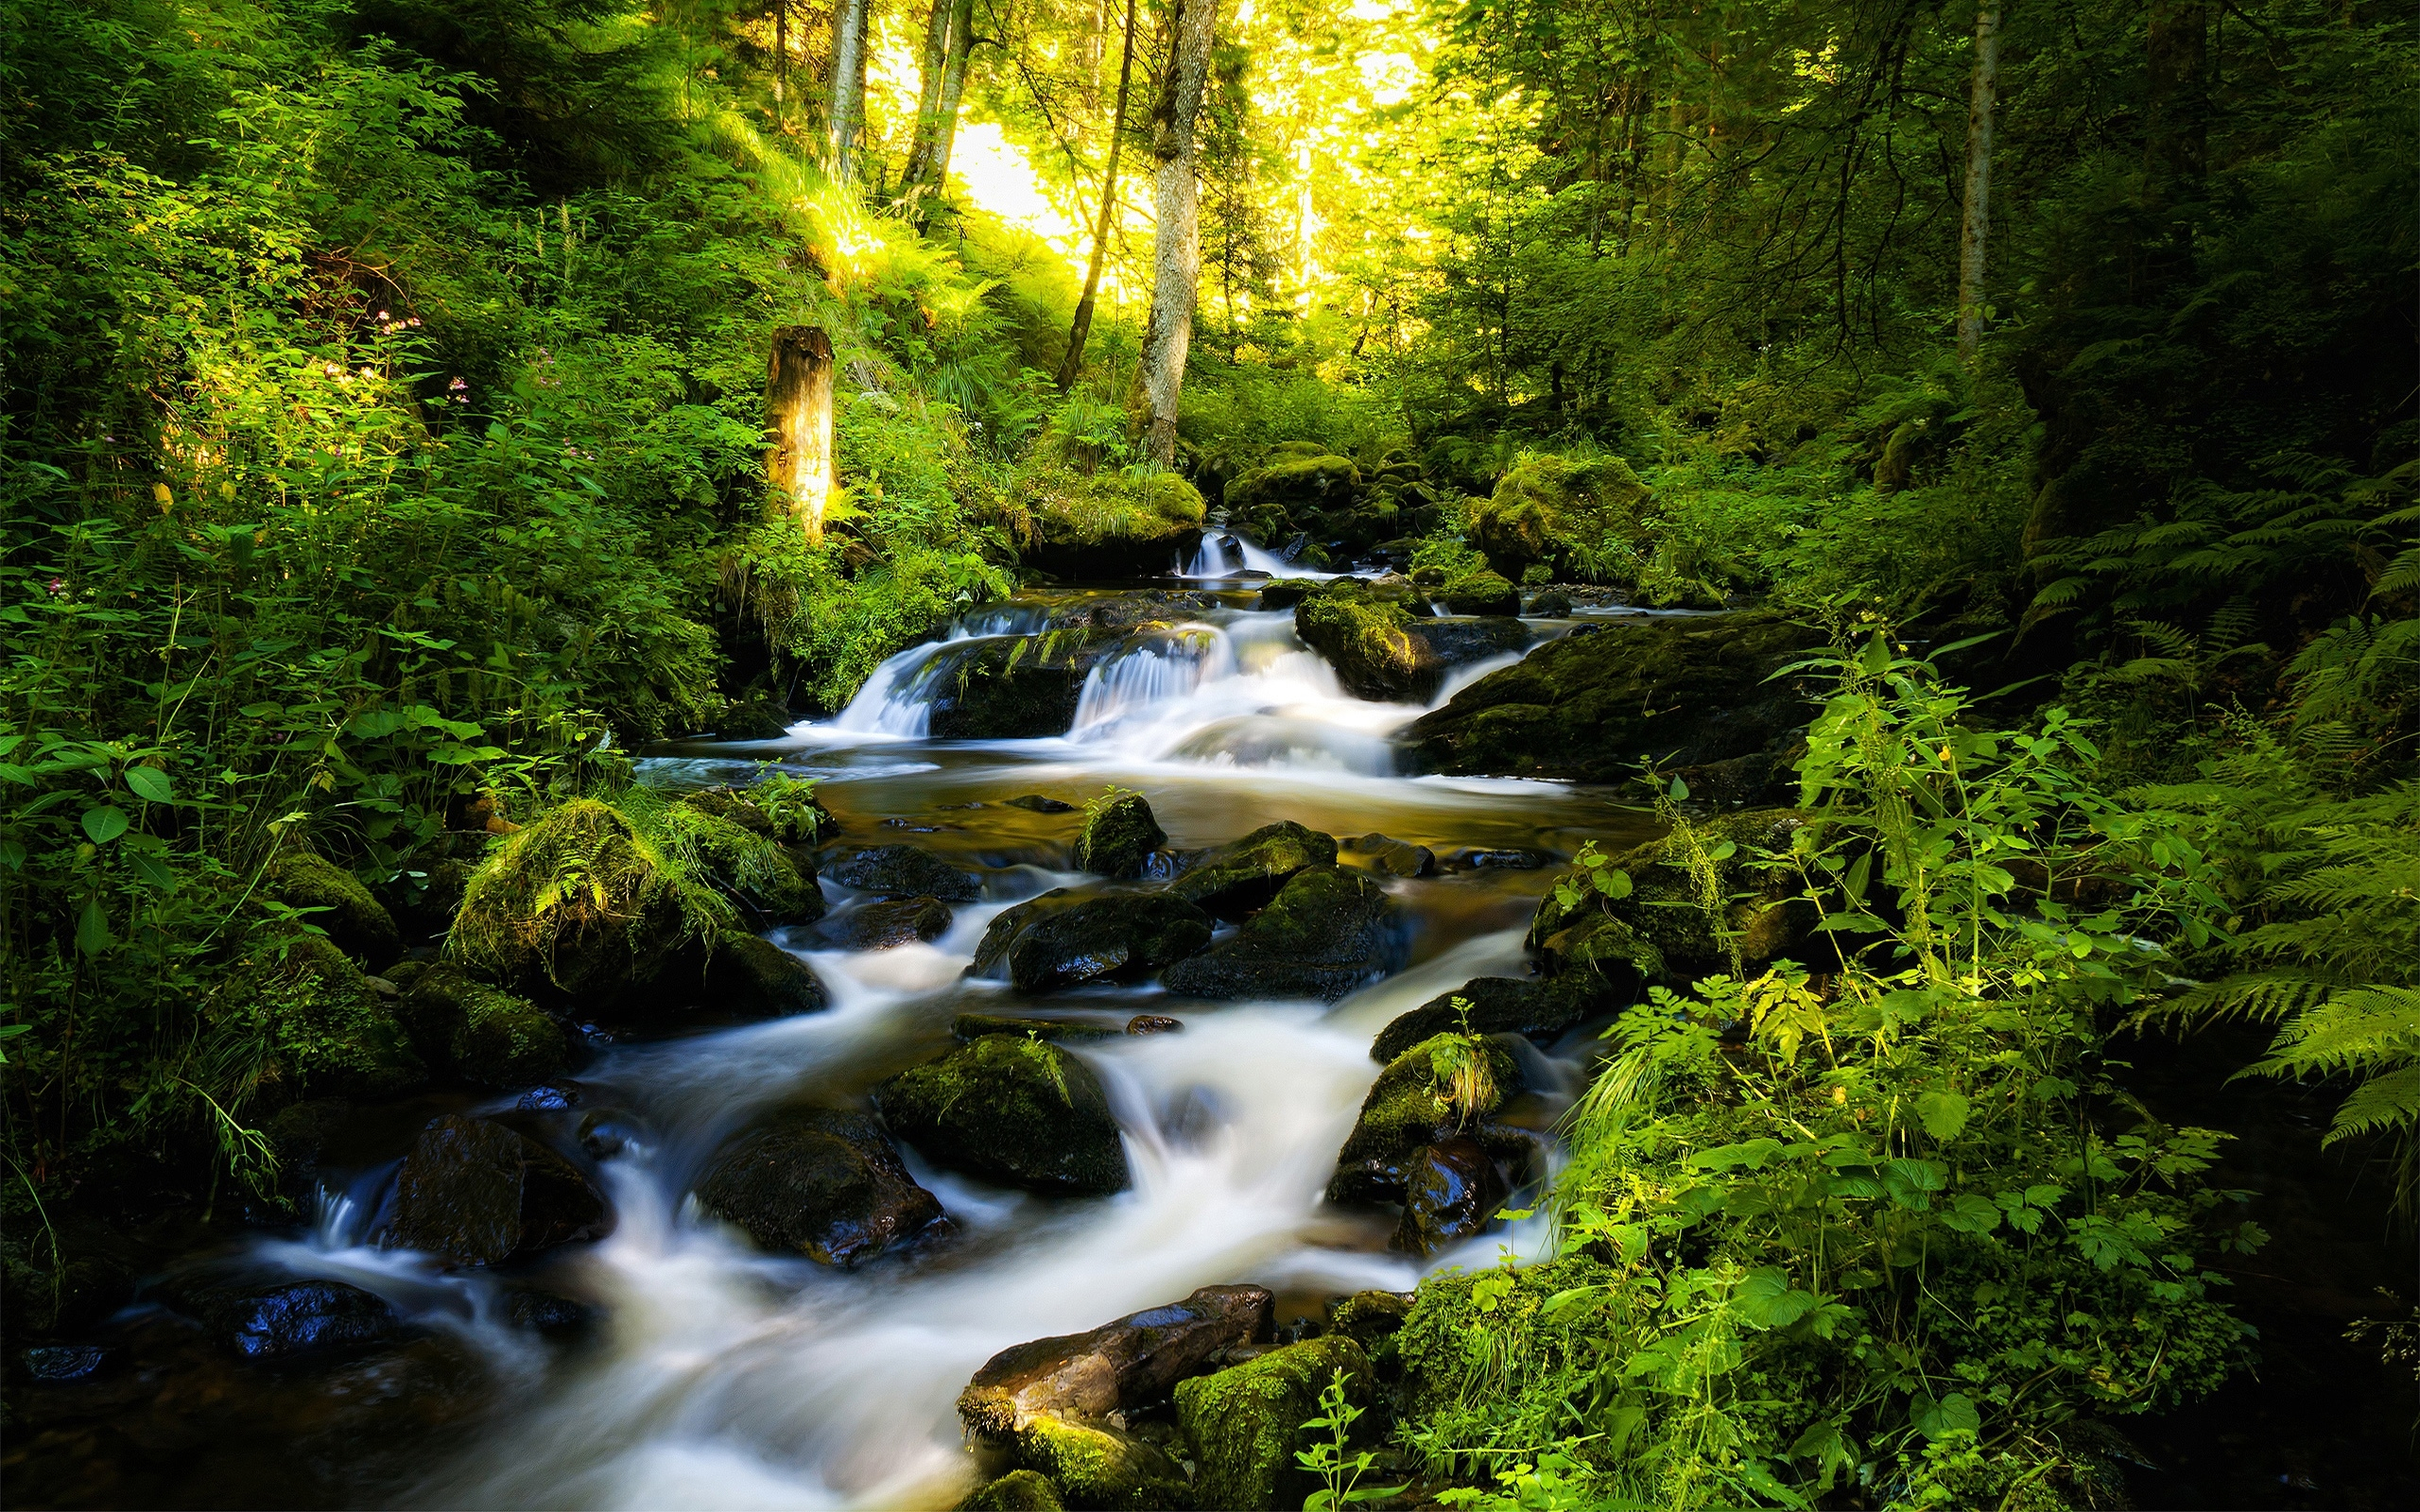 Scenic view of river flowing through lush green forest with a waterfall and creek.